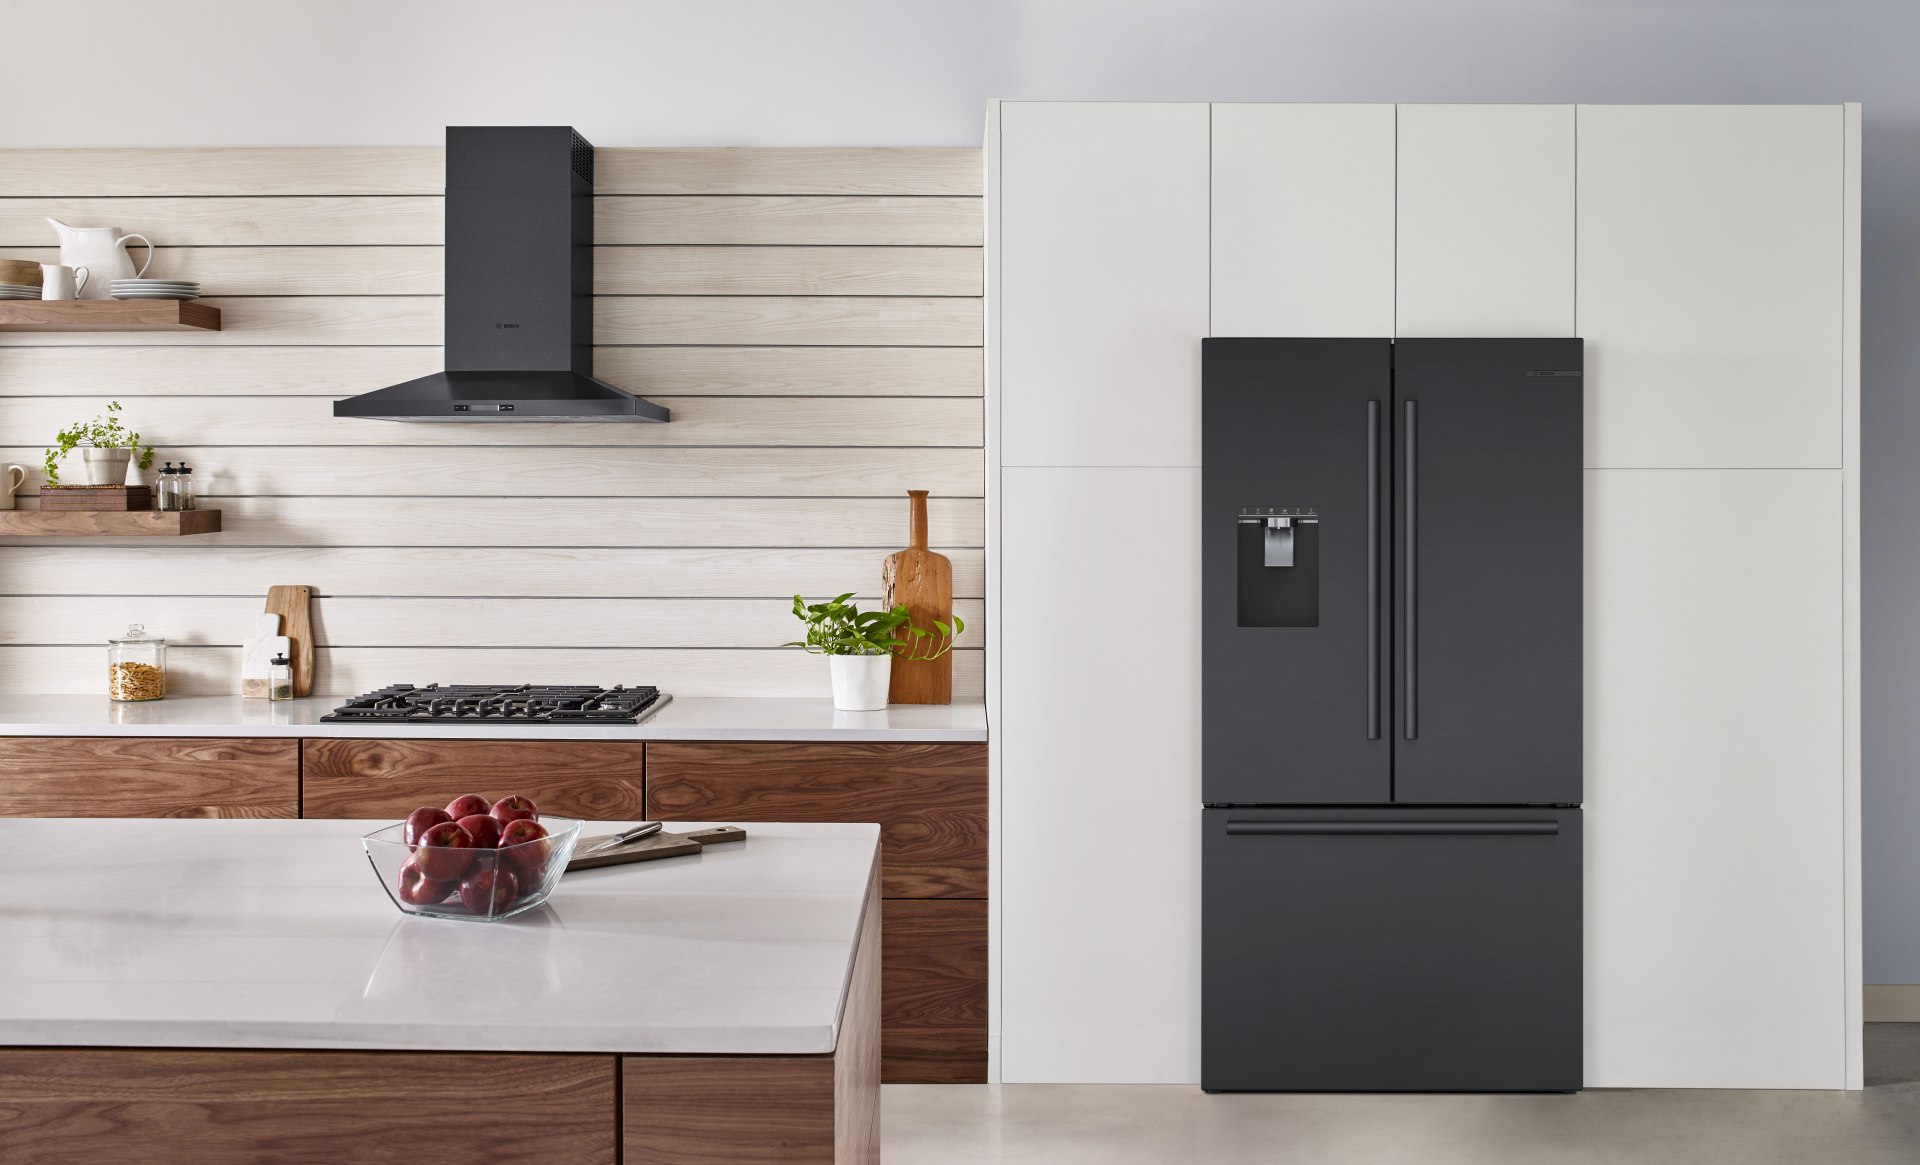 black or stainless steel appliances